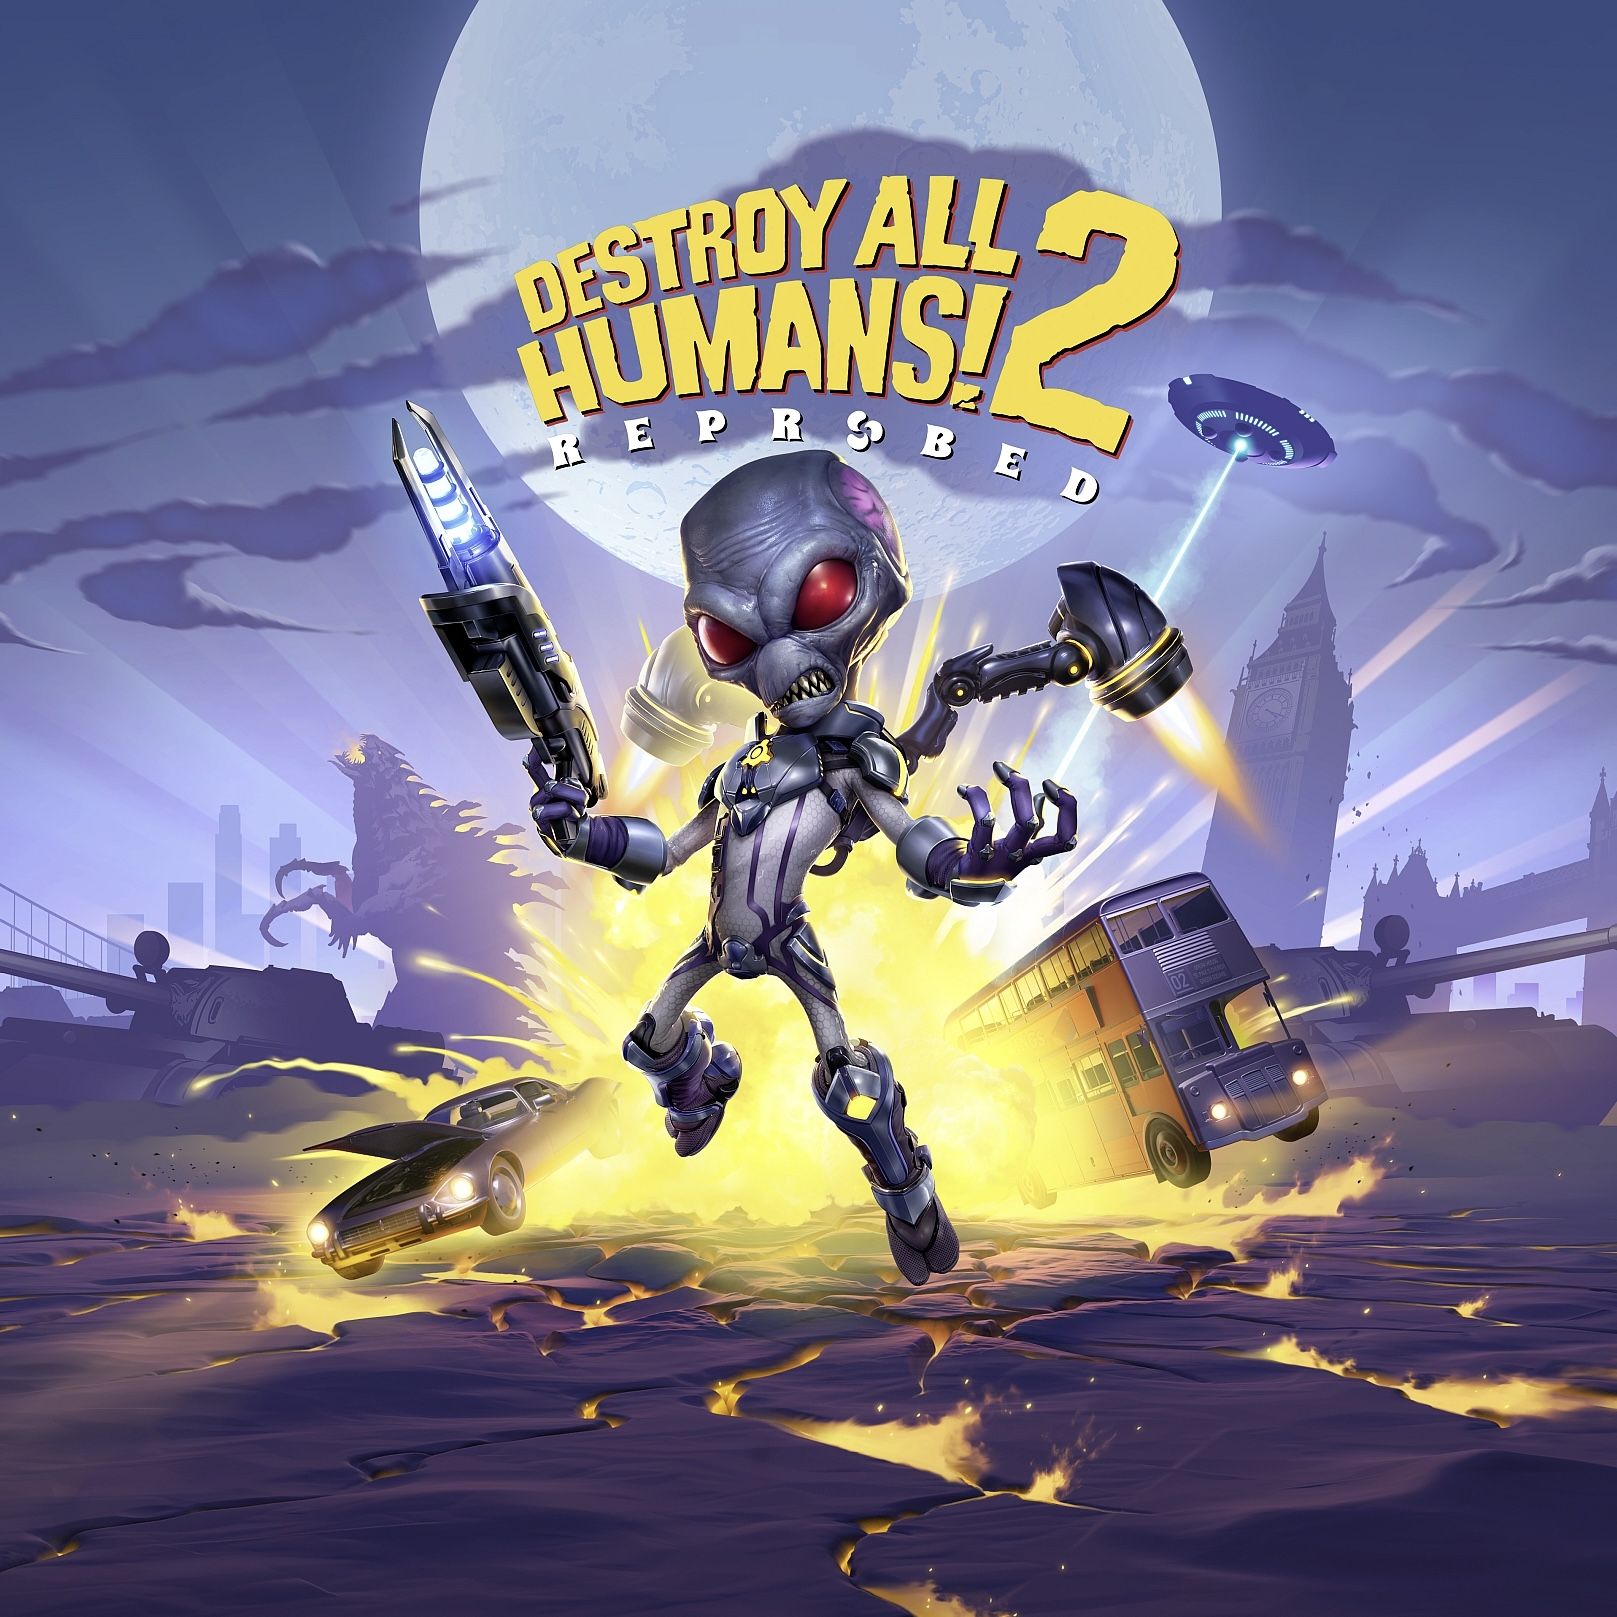 Destroy all Humans 2 reprobed. Destroy all Humans! 2 - Reprobed (ps5). Игры на ПС. Destroy all Humans!. All humans 2 reprobed